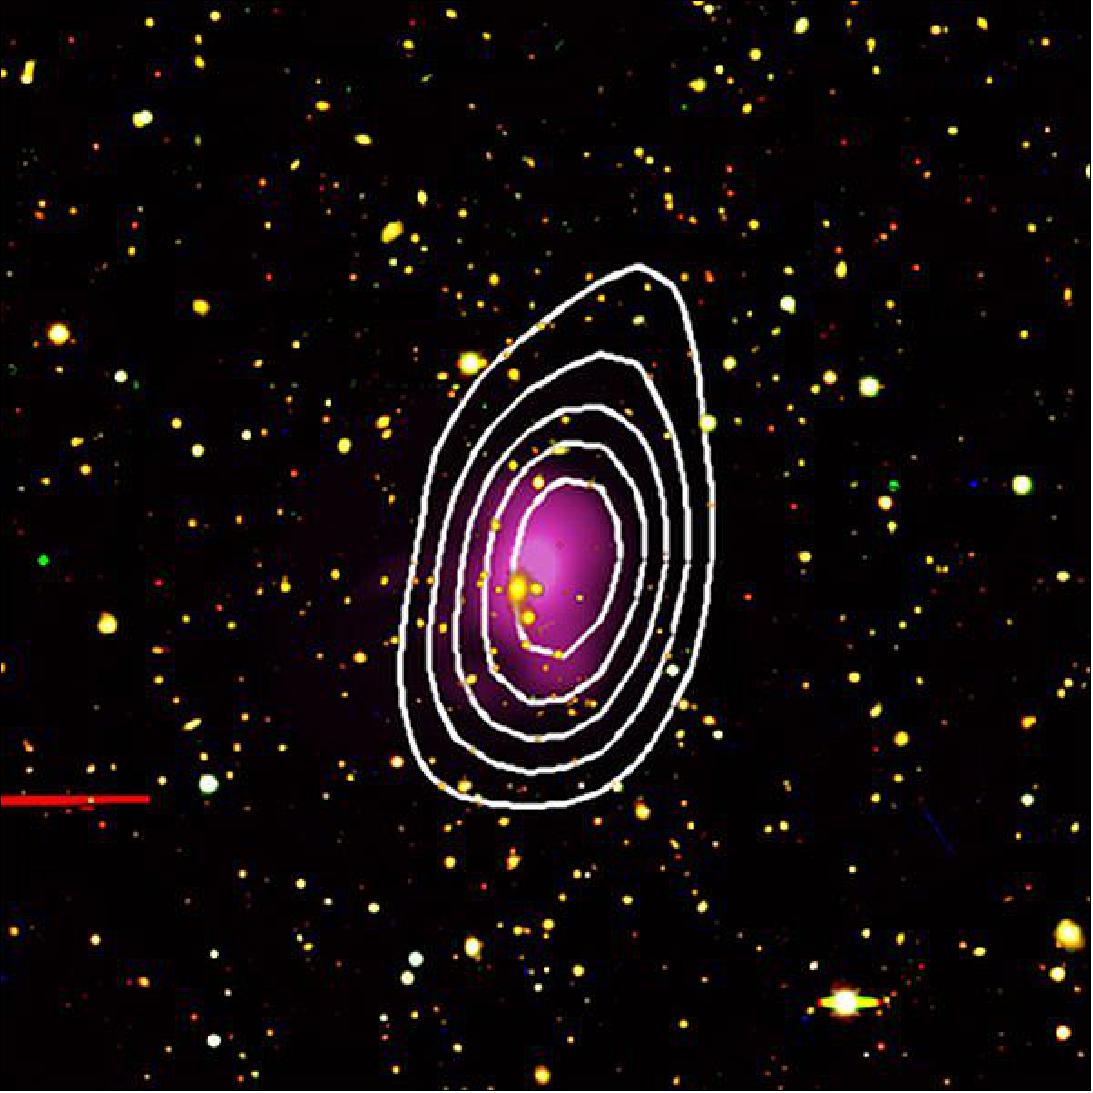 Figure 130: Composite X-ray and optical image of the massive galaxy cluster SPT-CL J2332-5358, with contours depicting the region of the Sunyaev-Zel'dovich effect signature (image credit: ESA/XMM-Newton; Background image: Blanco Cosmology Survey/NOAO/AURA/NSF; SZE contours: South Pole Telescope/NSF)